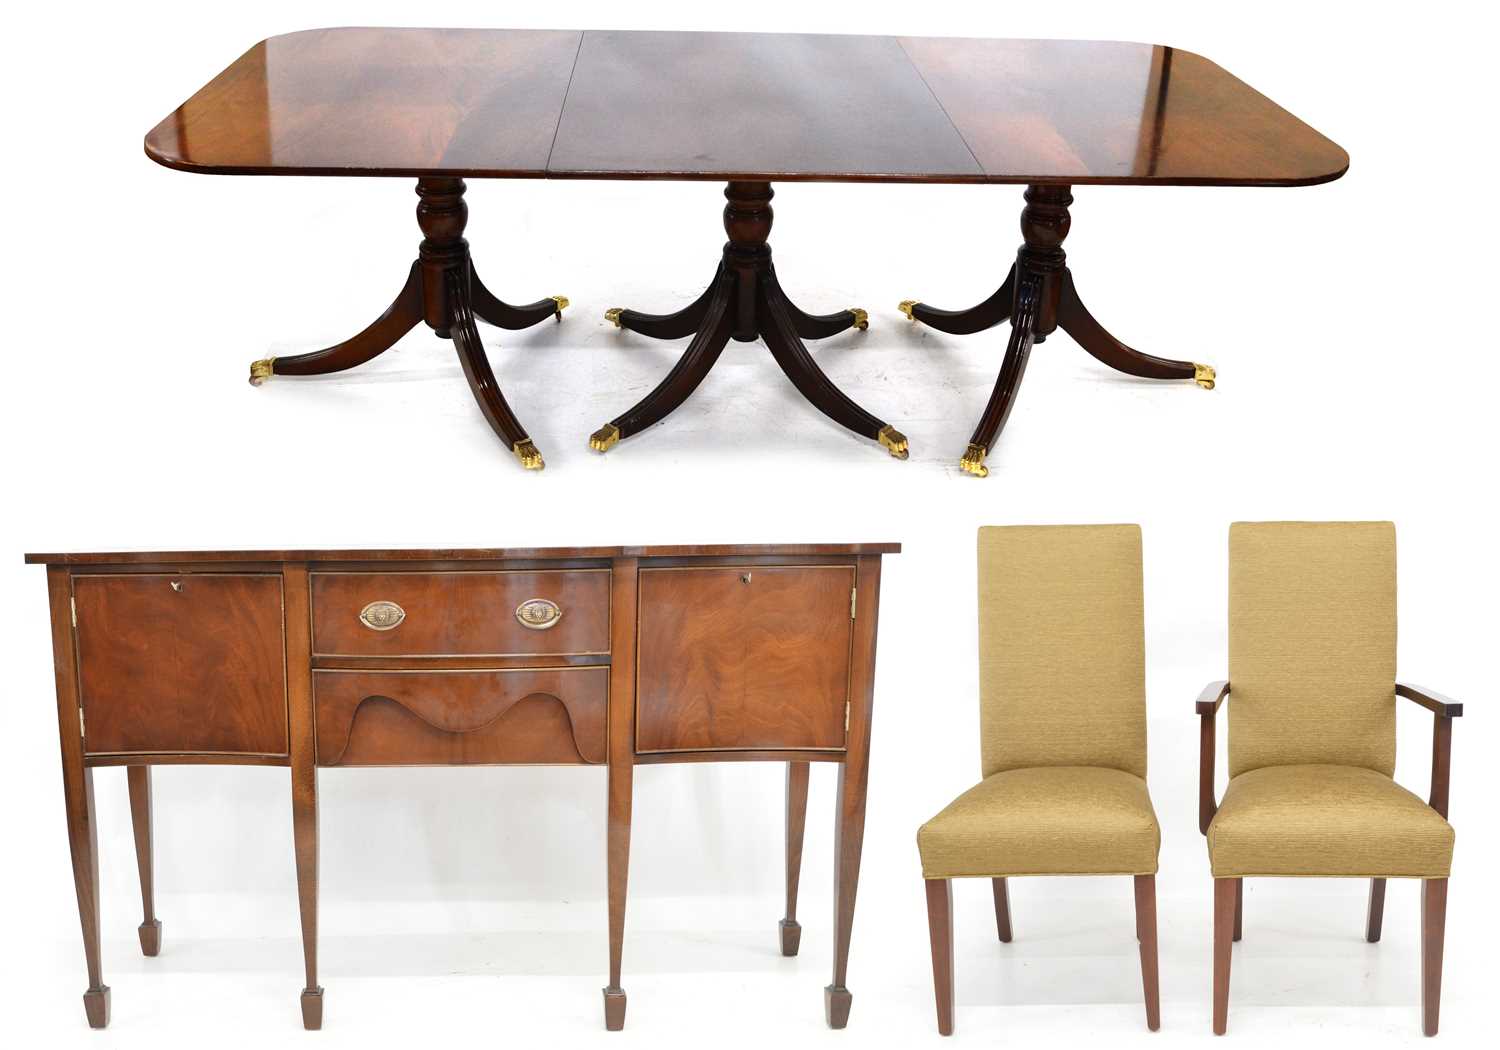 Lot 153 - Reproduction Dining Room Furniture